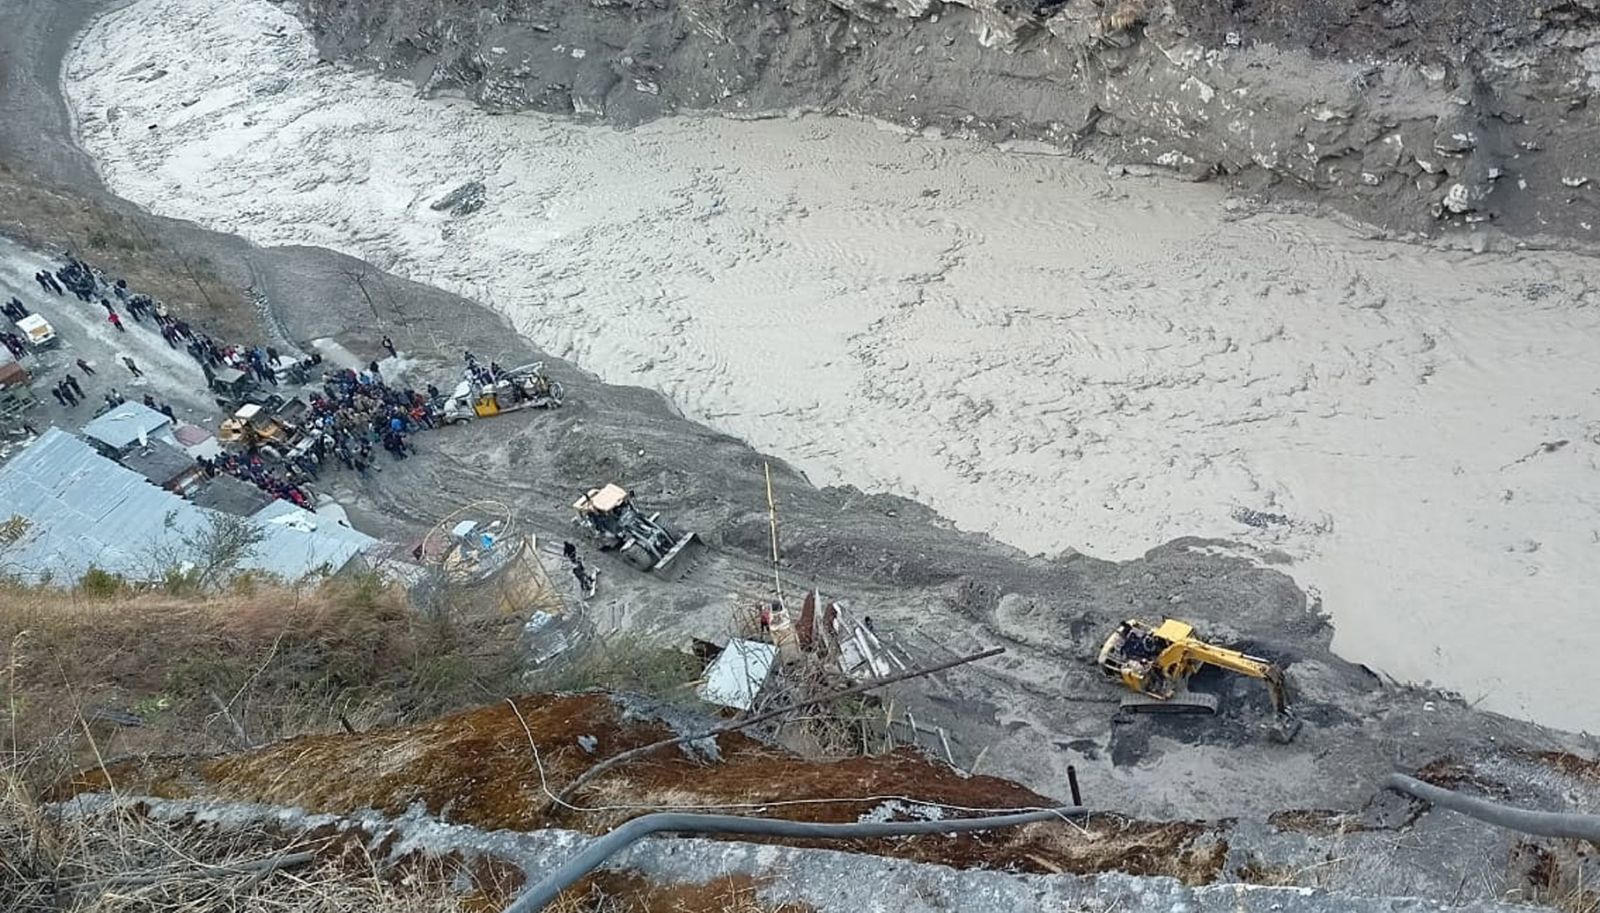 epa08993669 A general view of a rescue operation near the Dhauliganga hydro power project after a portion of Nanda Devi glacier broke off, at Reni village in Chamoli district, Uttrakhand, India, 07 February 2021. Over 100 people are feared dead after part of the Nanda Devi glacier broke off causing massive floods in the Tapovan area of Uttarakhand's Chamoli district.  EPA/ARVIND MOUDGIL -- BEST QUALITY AVAILABLE --